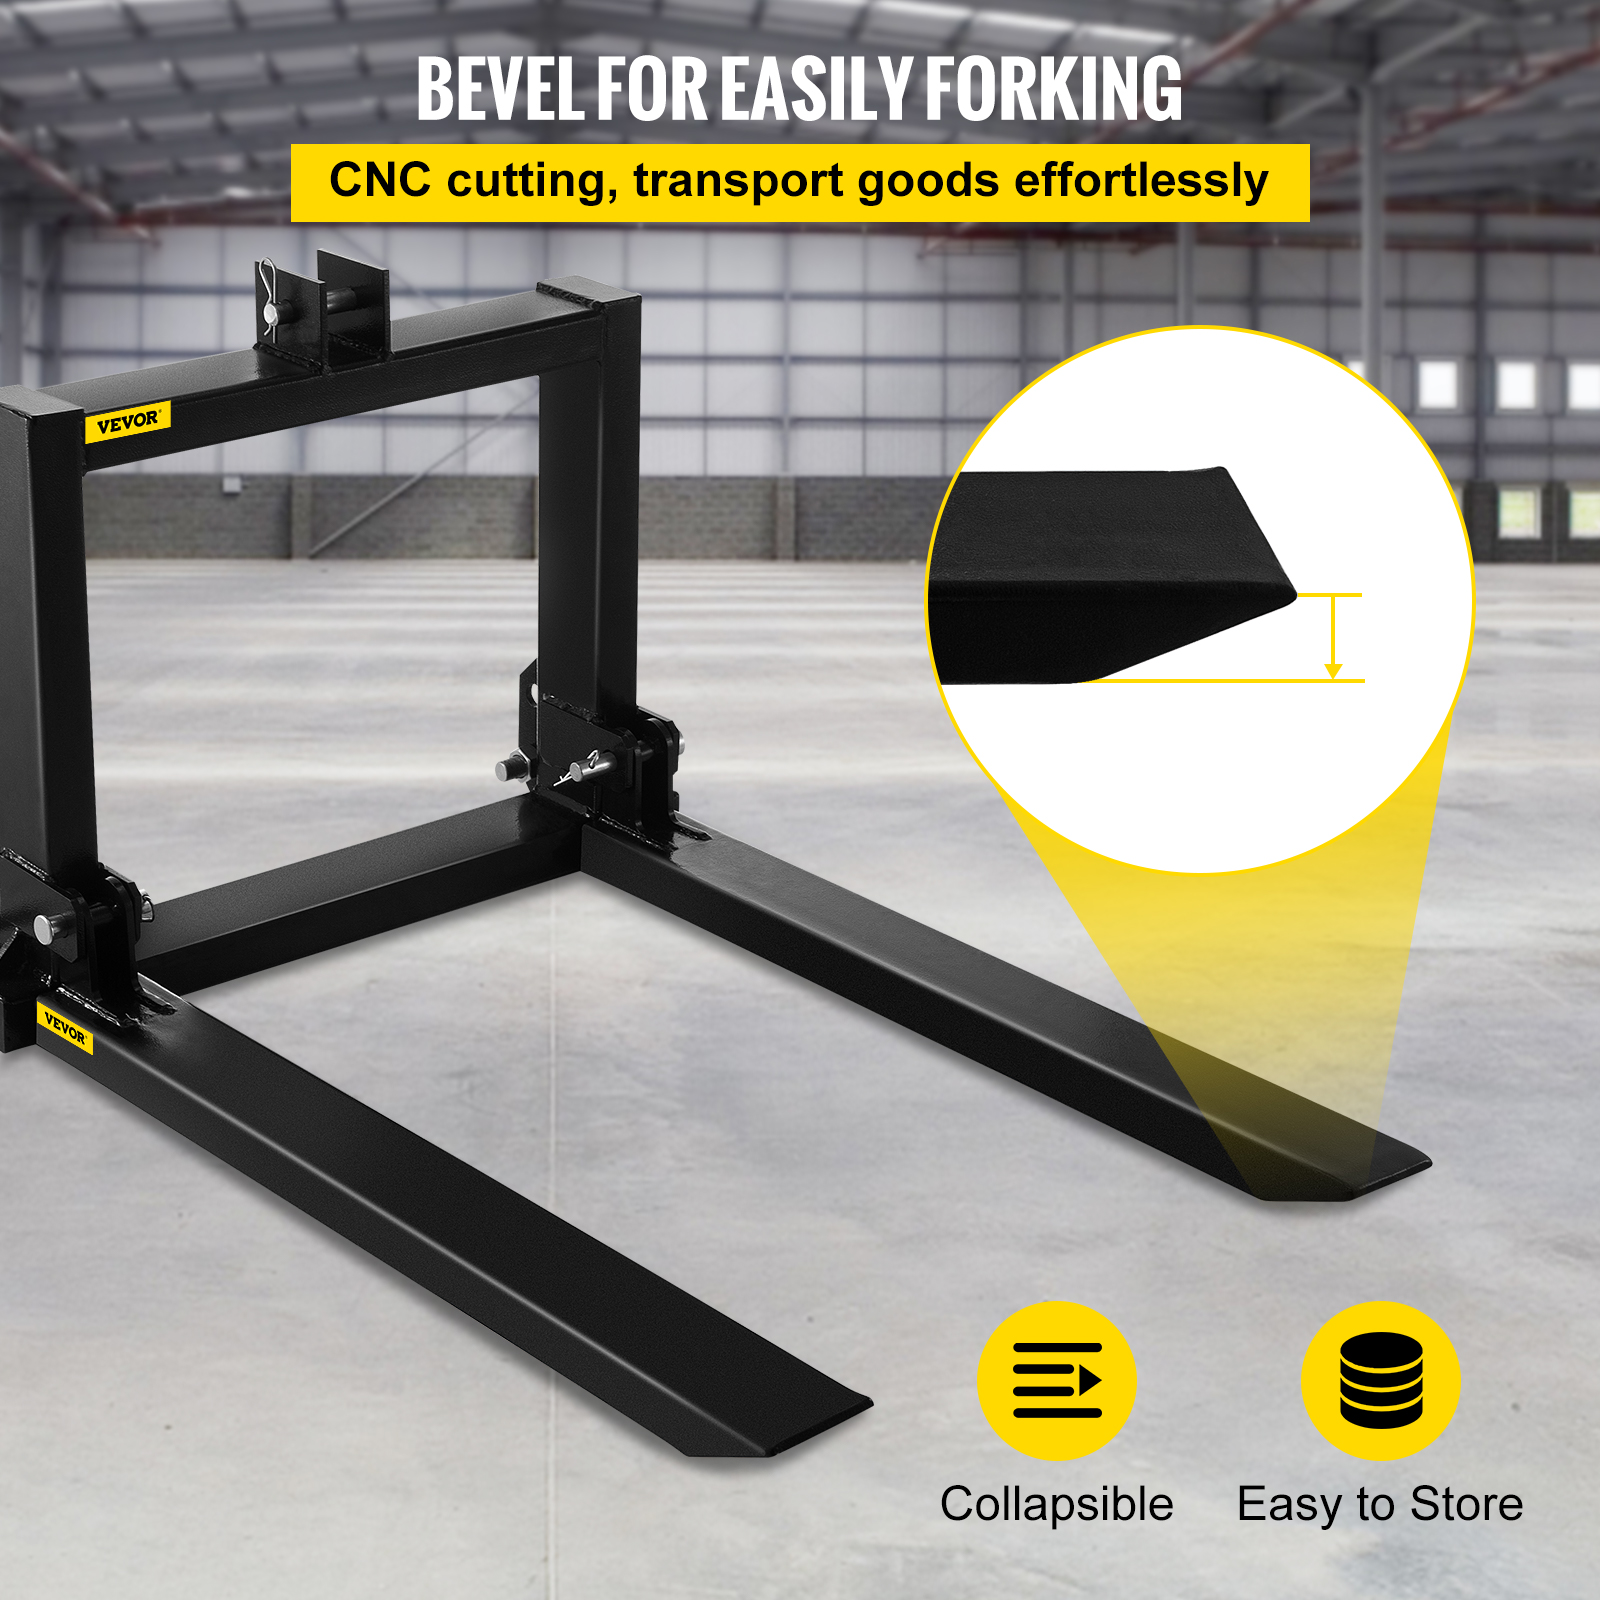 Vevor 3 Point Hitch Pallet Fork 2000lbs Fork Attachment For Category 1